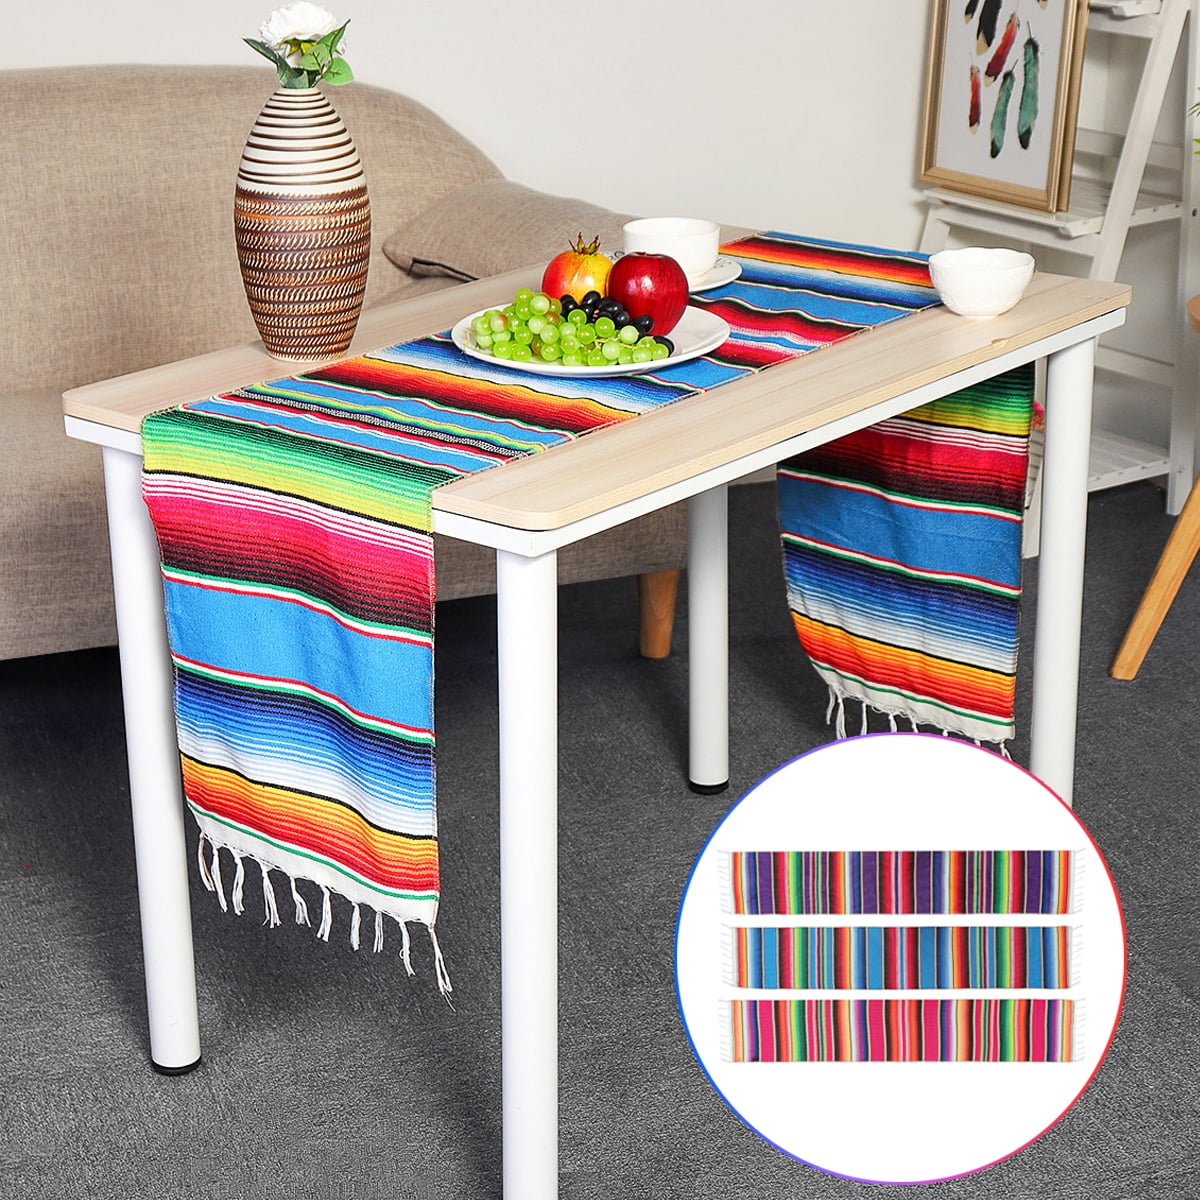 Keeda Fiesta Pack of 2 Mexican Table Runner 14 x 84 inch Authentic Handwoven Cotton Serape Mexican Party Decorations Serape Table Runners Wedding Fiesta Party Decorations Mexican Runners